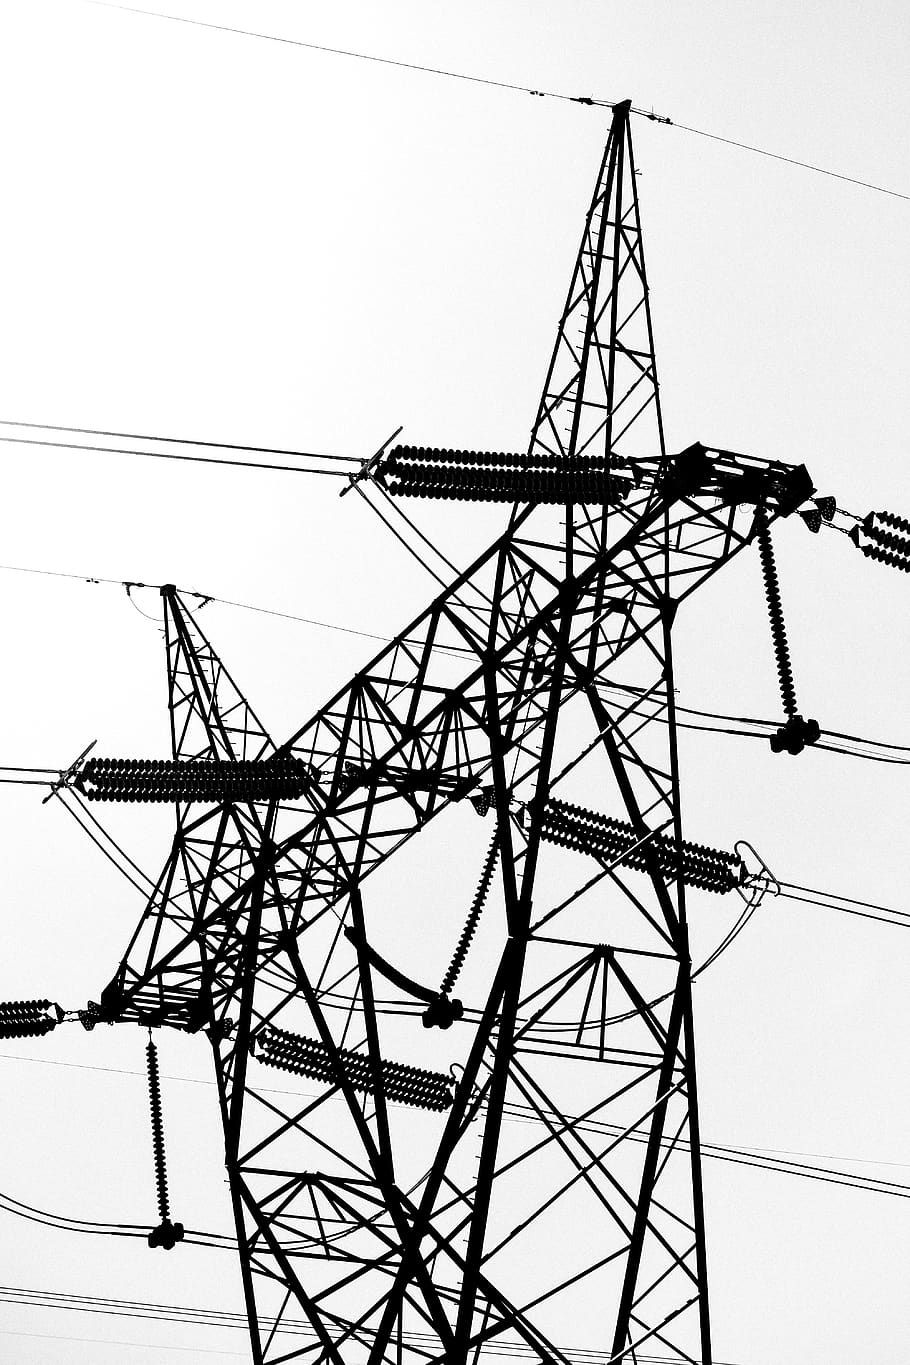 utility pole, power lines, cable, electric transmission tower